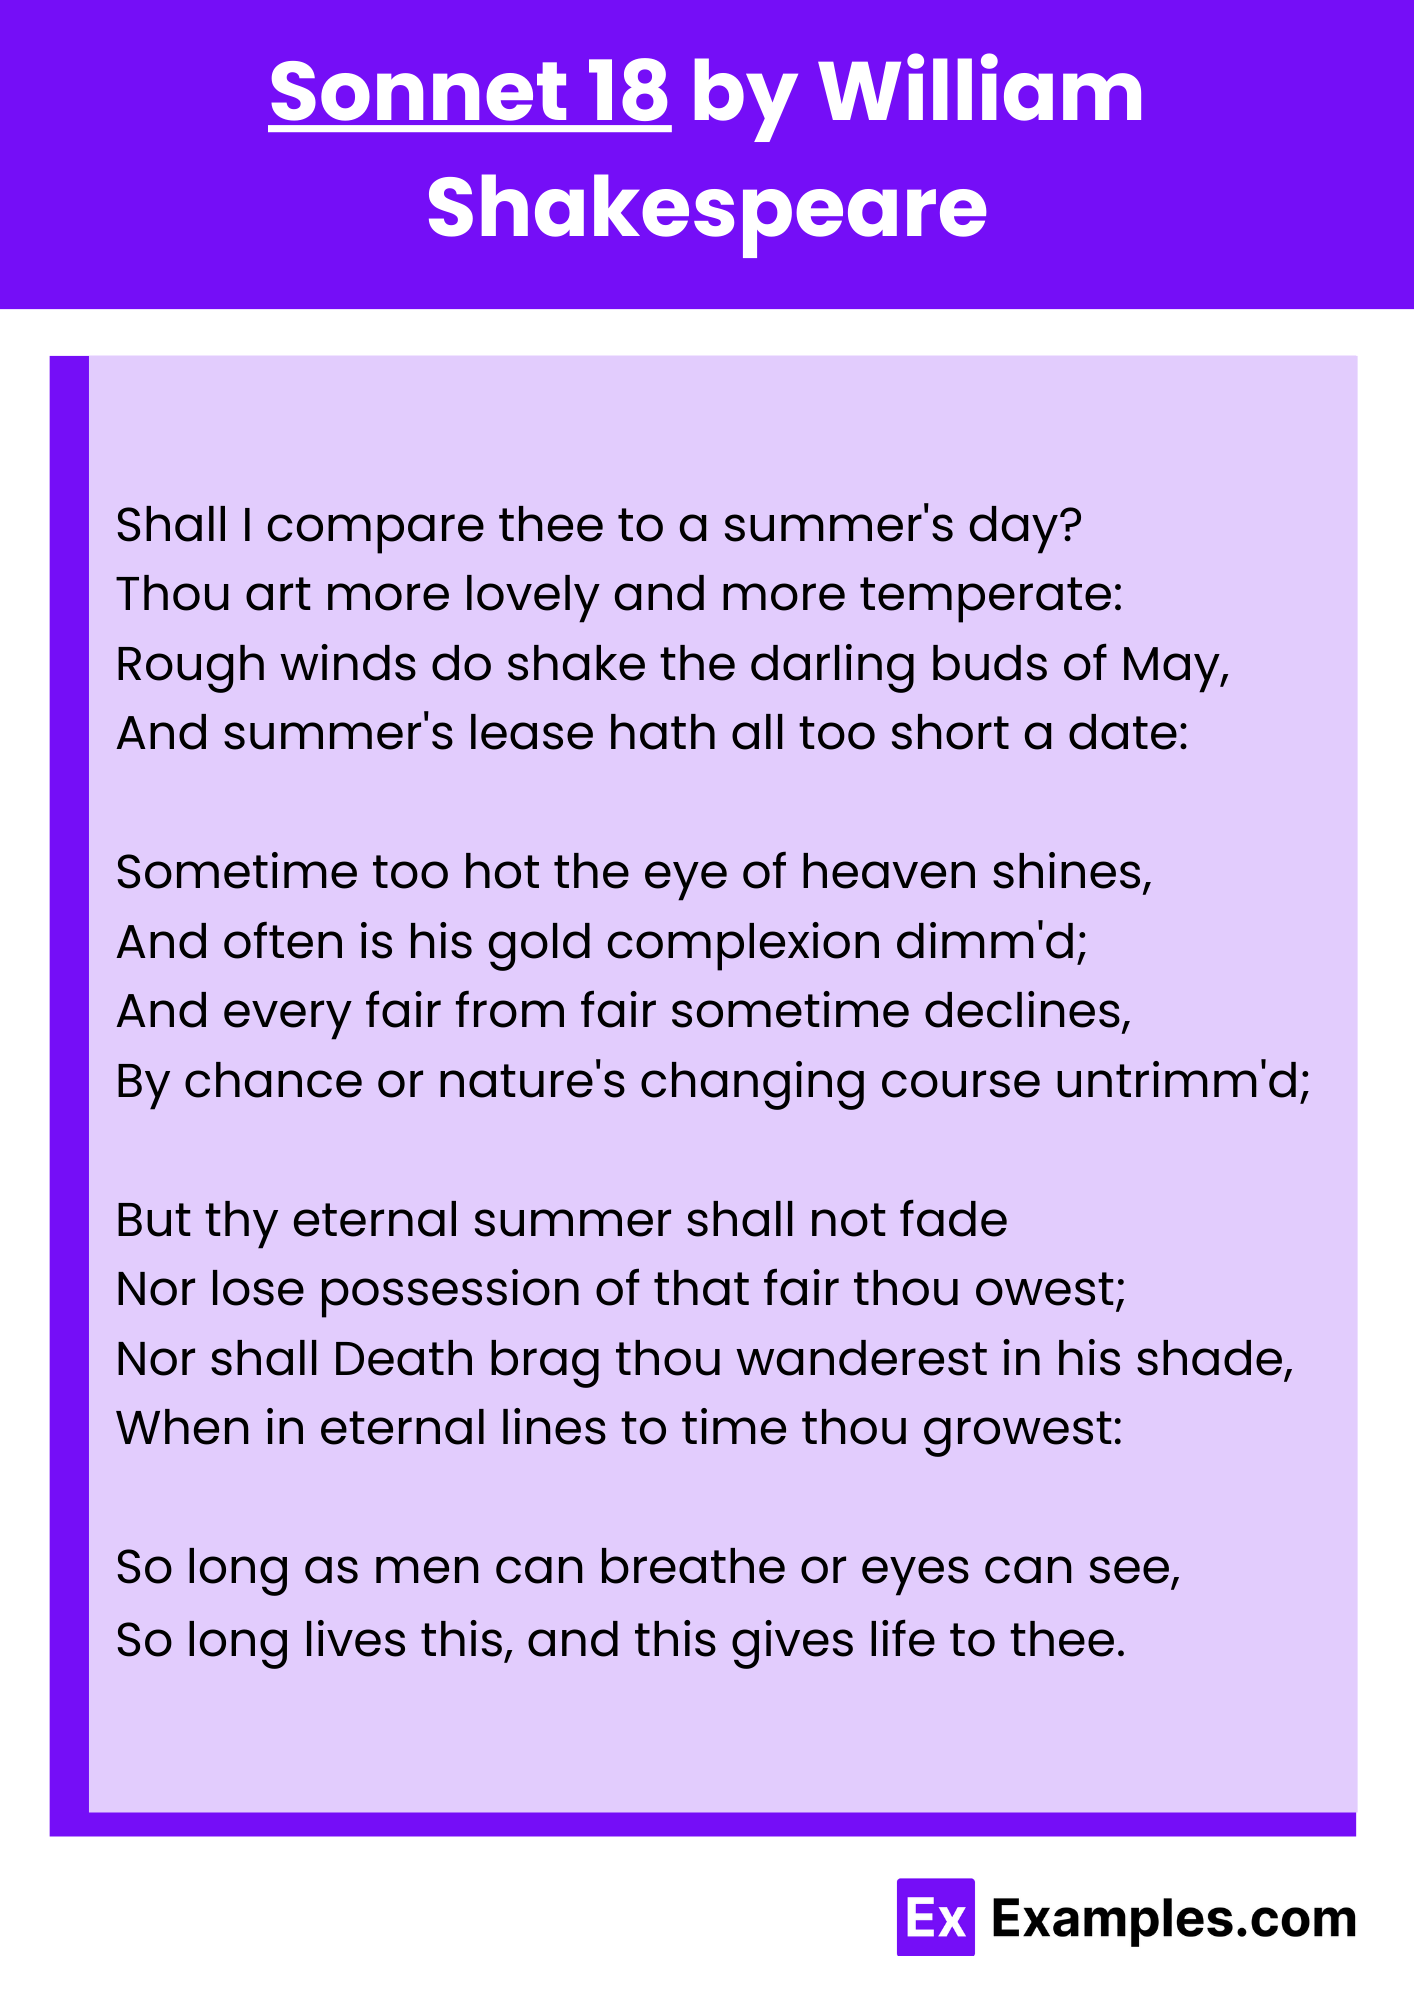 Sonnet 18 by William Shakespeare